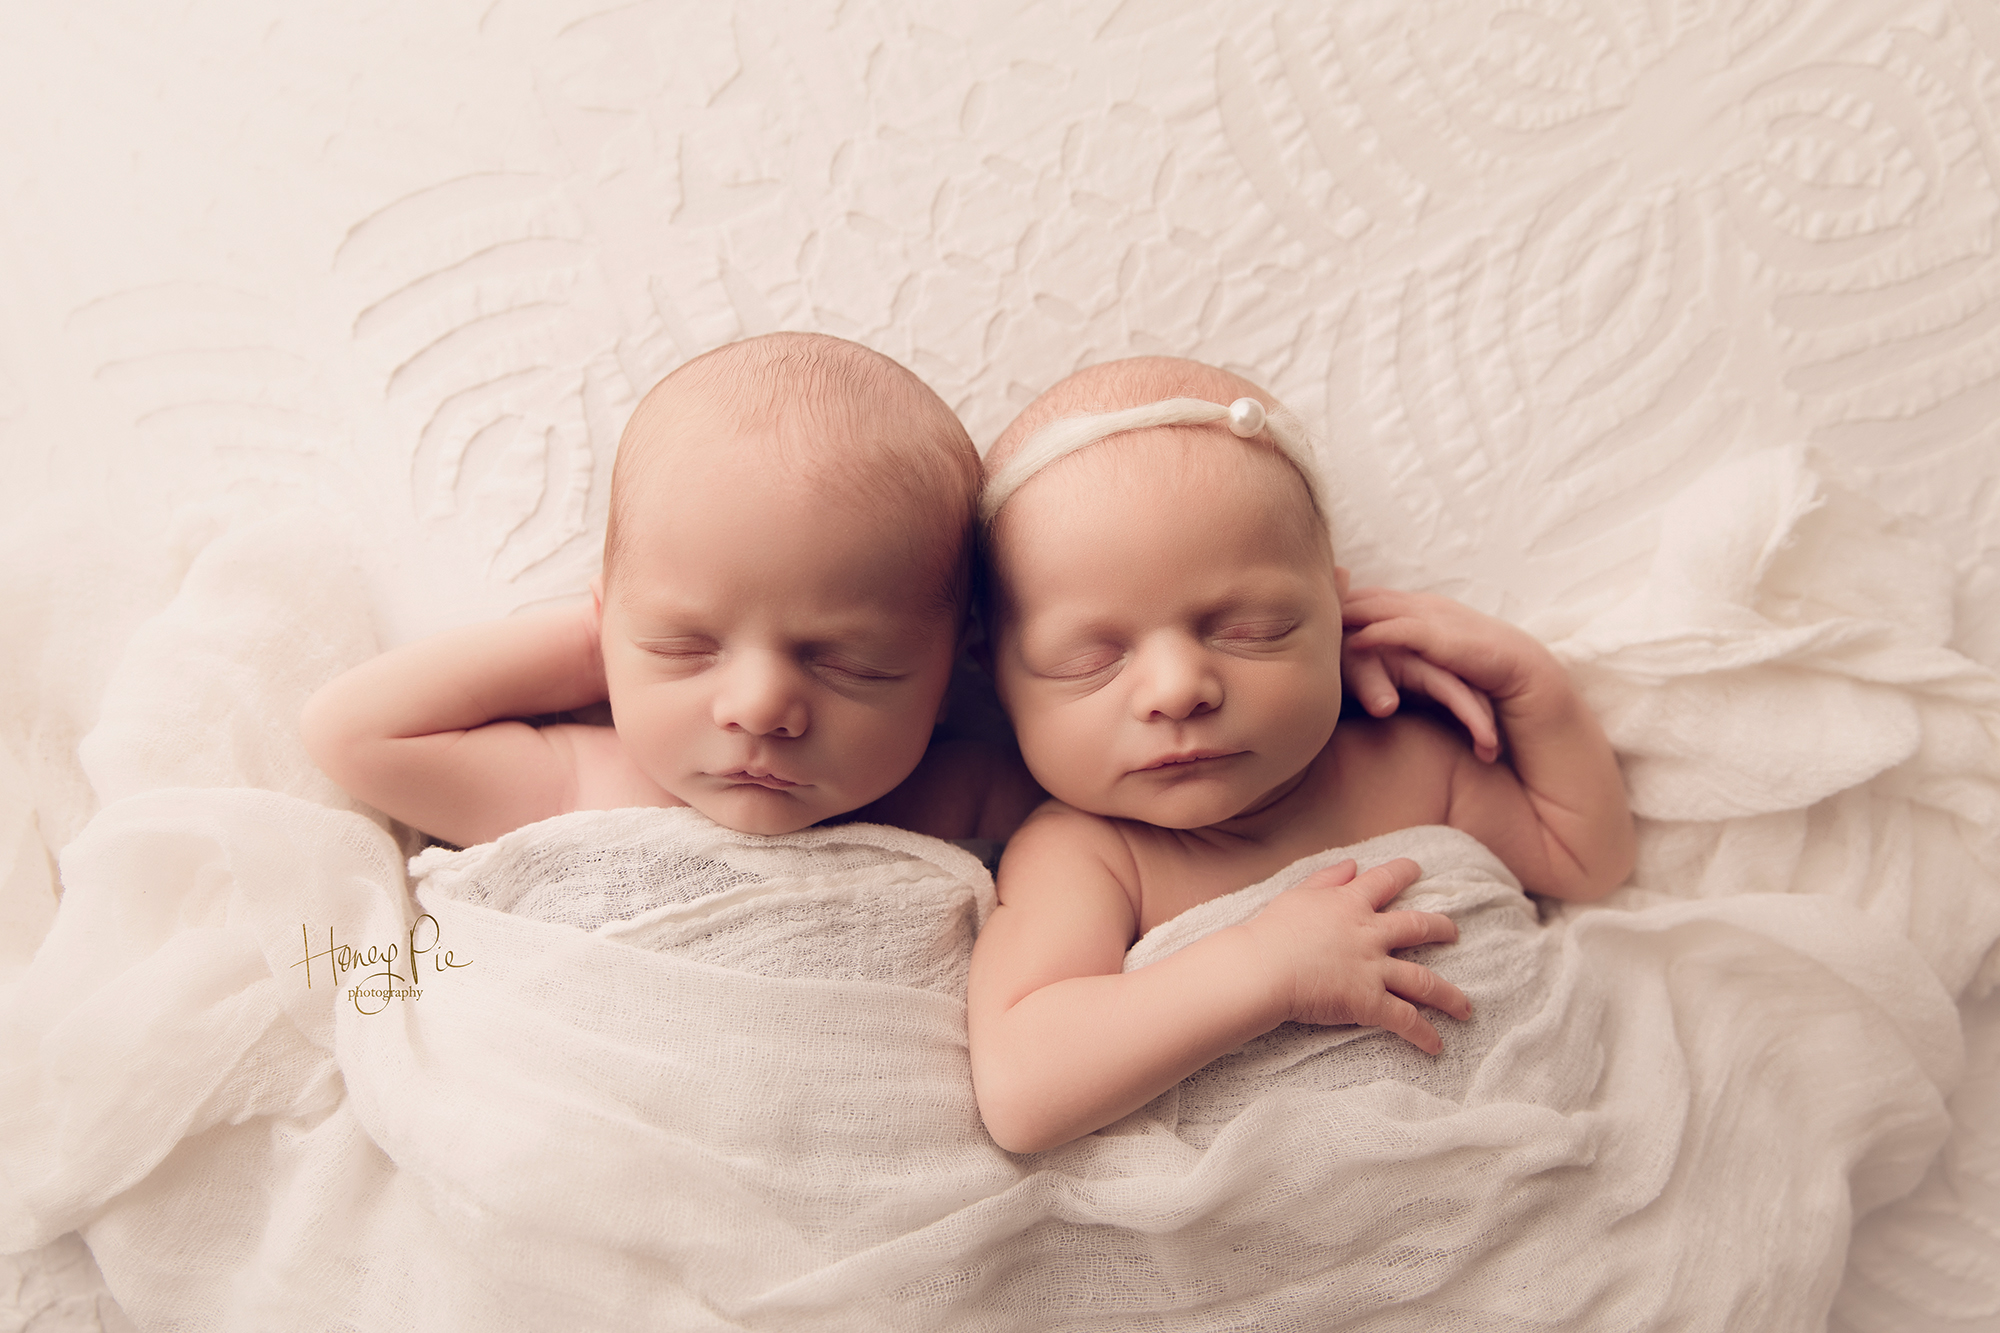 Twins cuddled up together & sleeping during their photography session